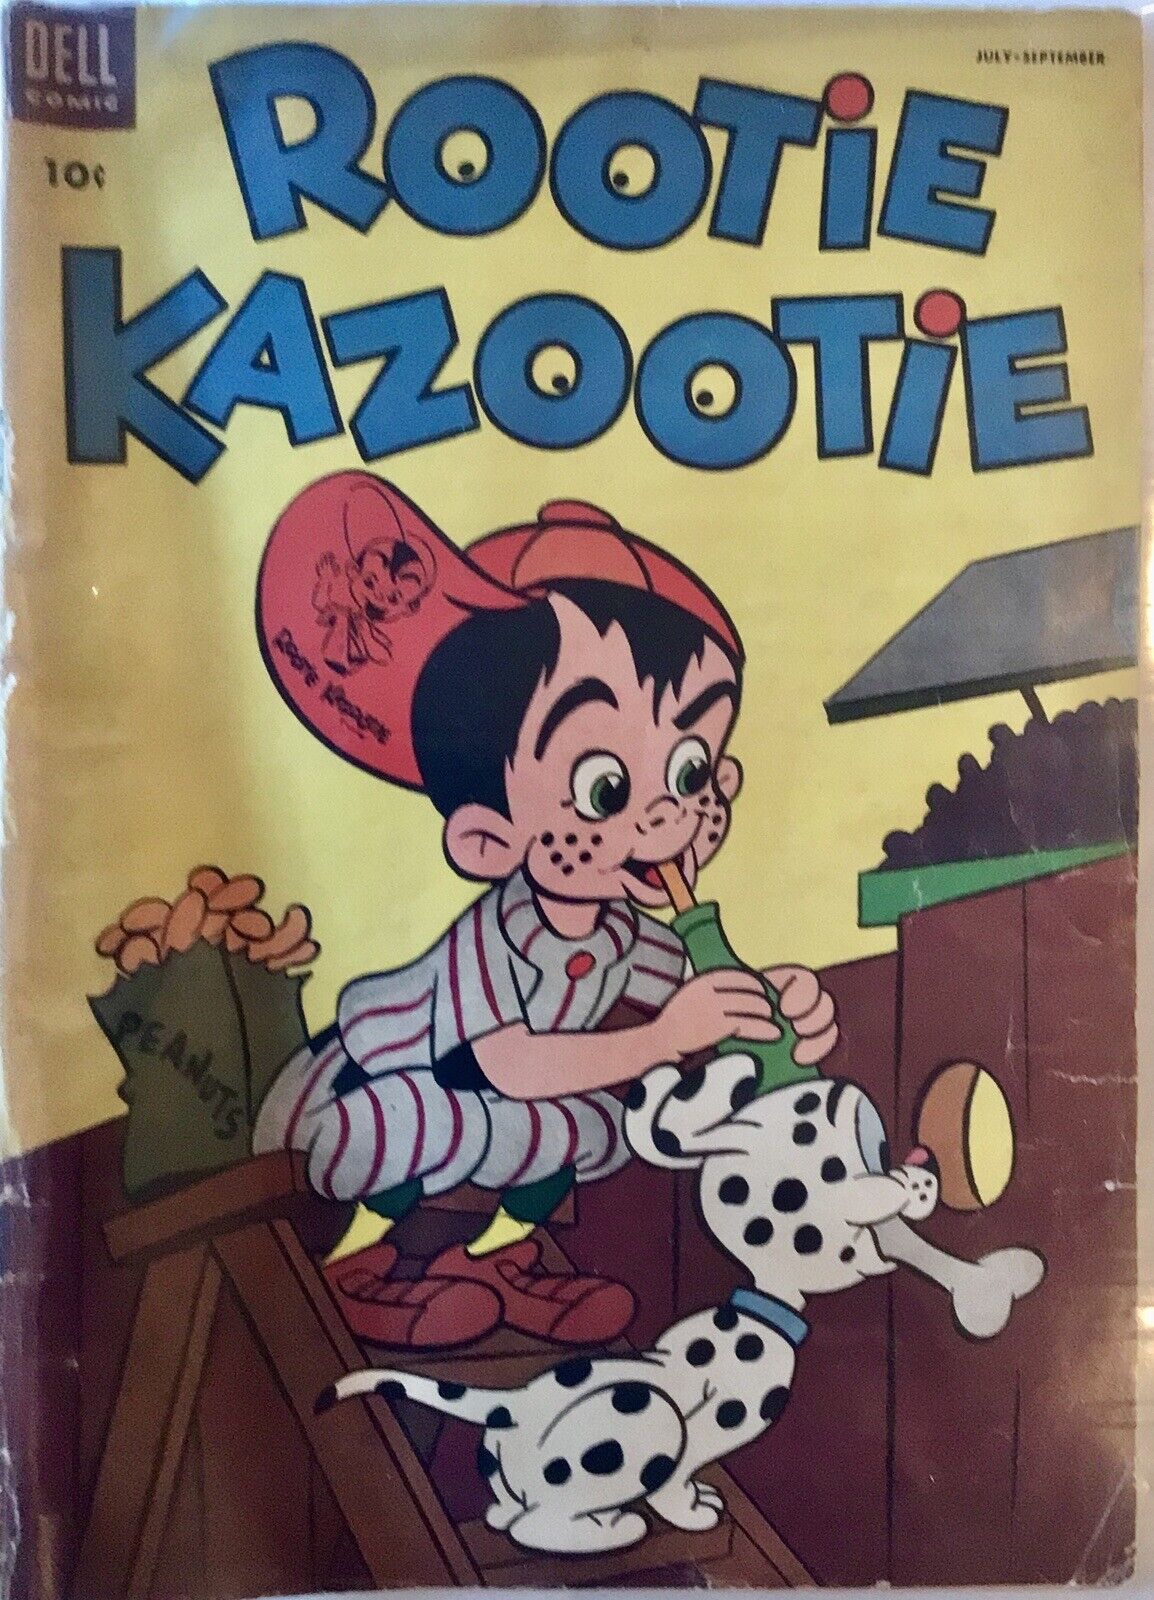 ROOTIE KAZOOTIE  #5, July-September 1954, BASEBALL Dell Comics, This Is Rare